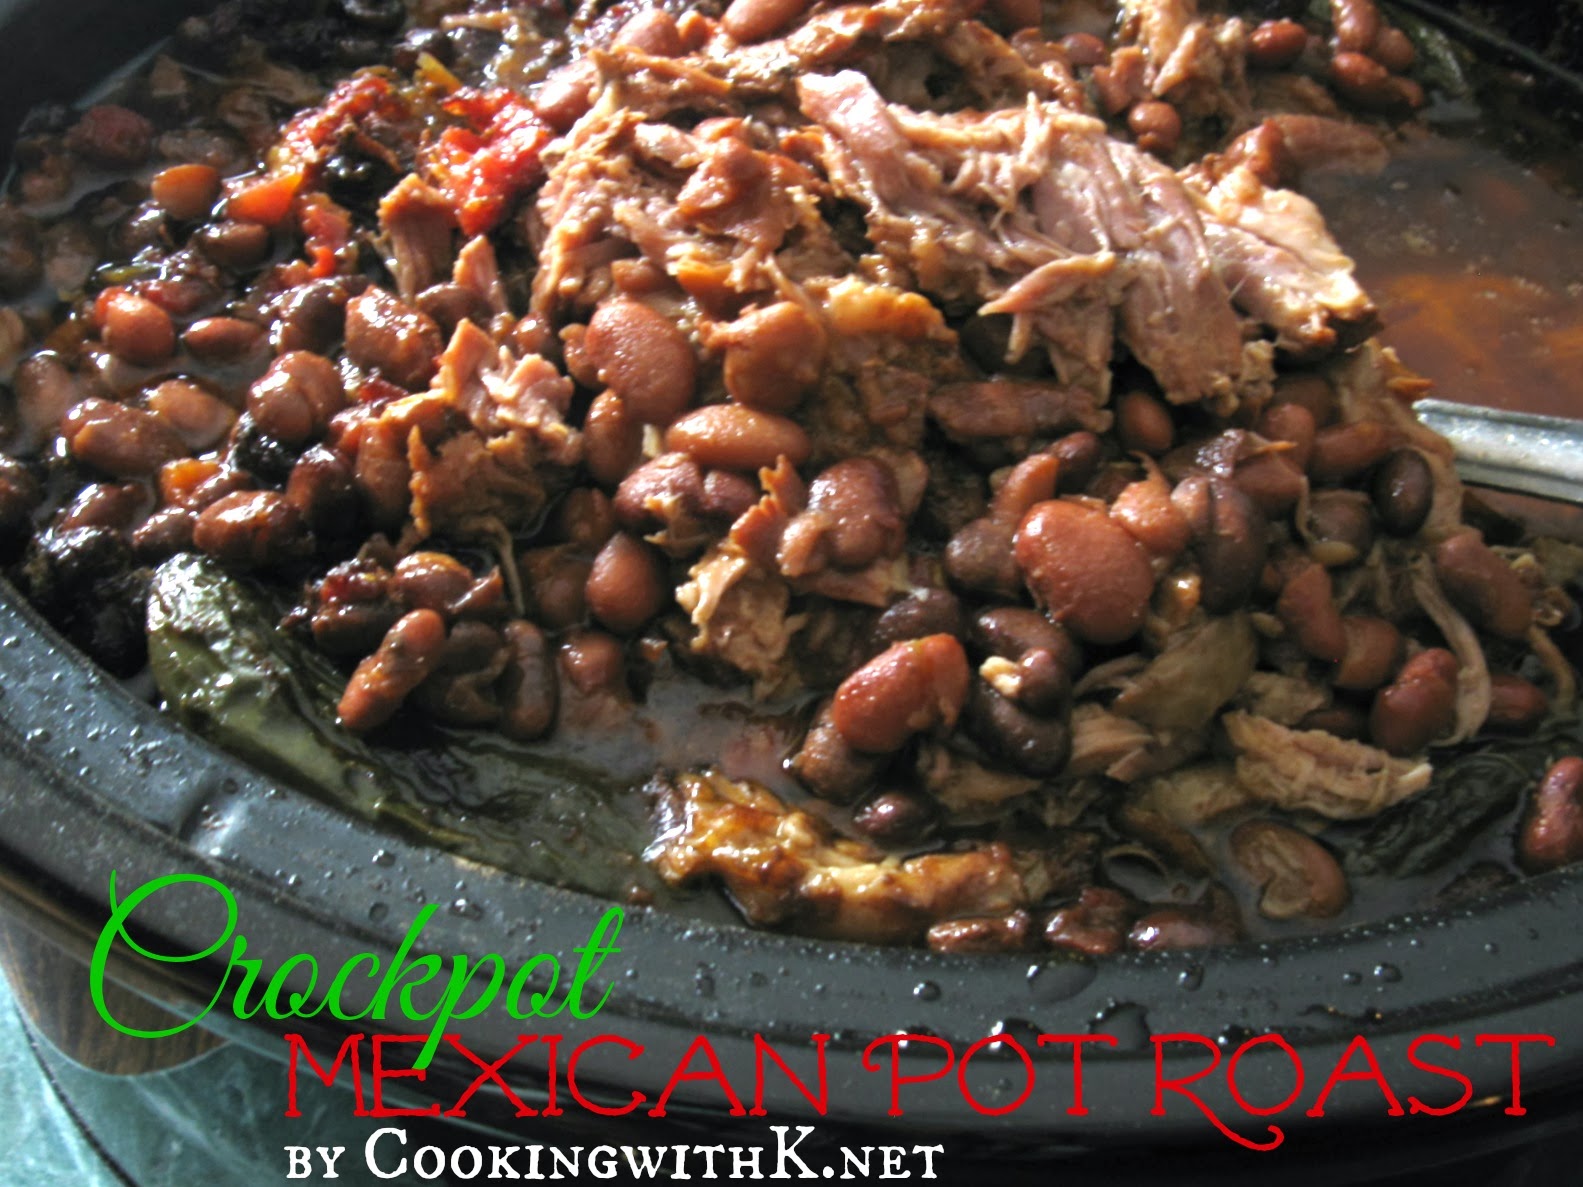 Cooking with K: Crockpot Mexican Pot Roast {A flavorful roast that the ...